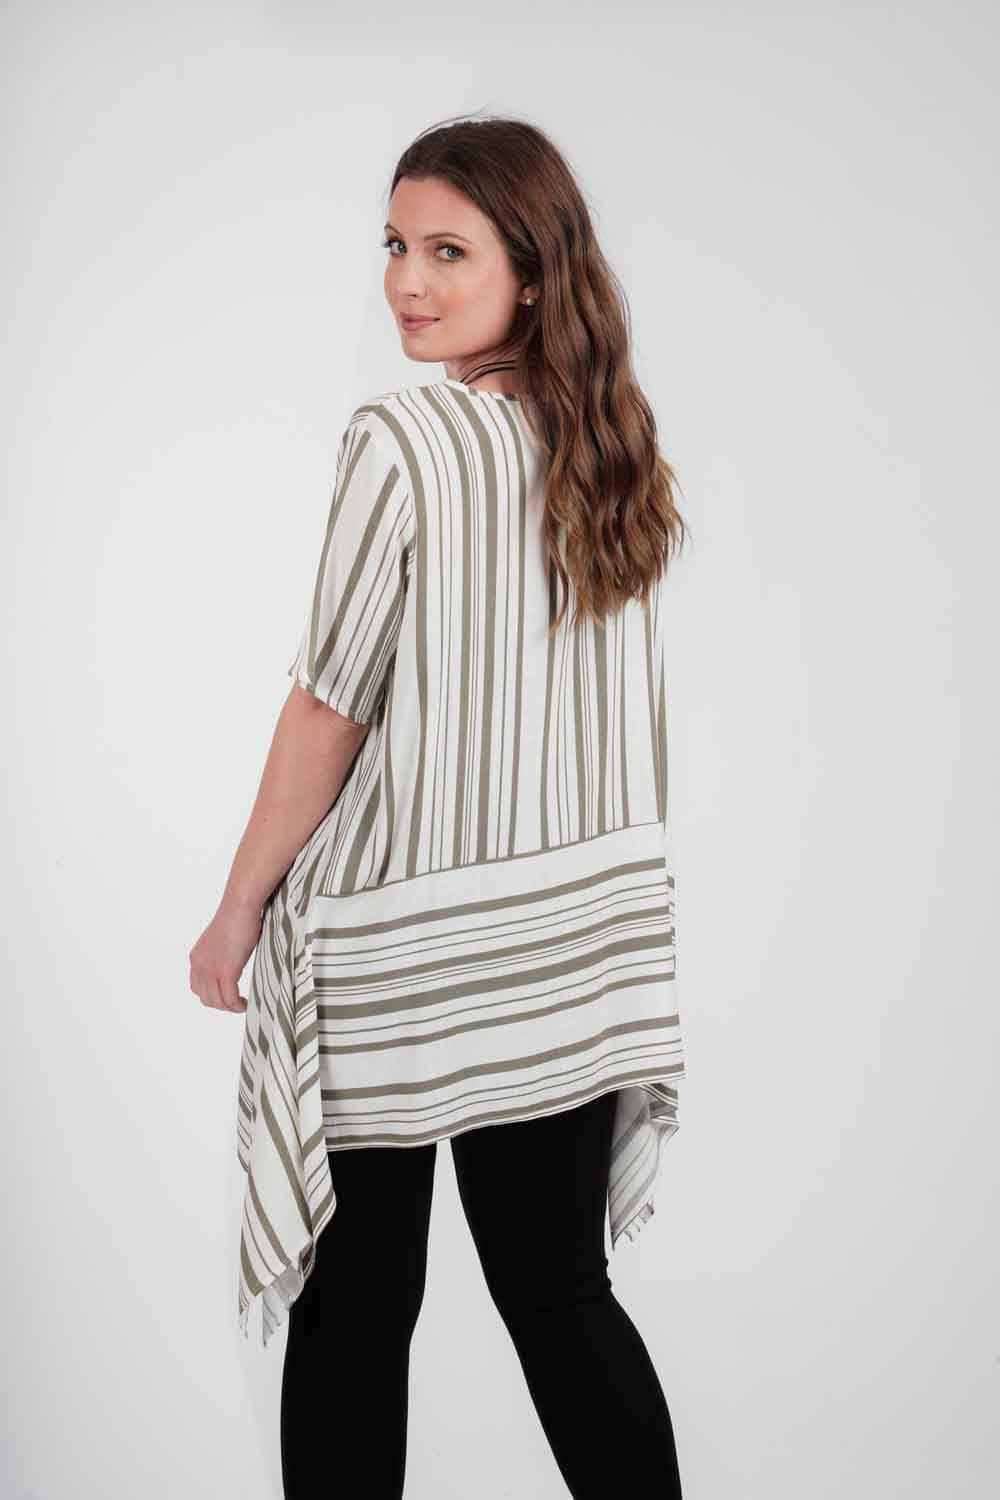 Saloos Top Long A-Line Striped Top with Necklace